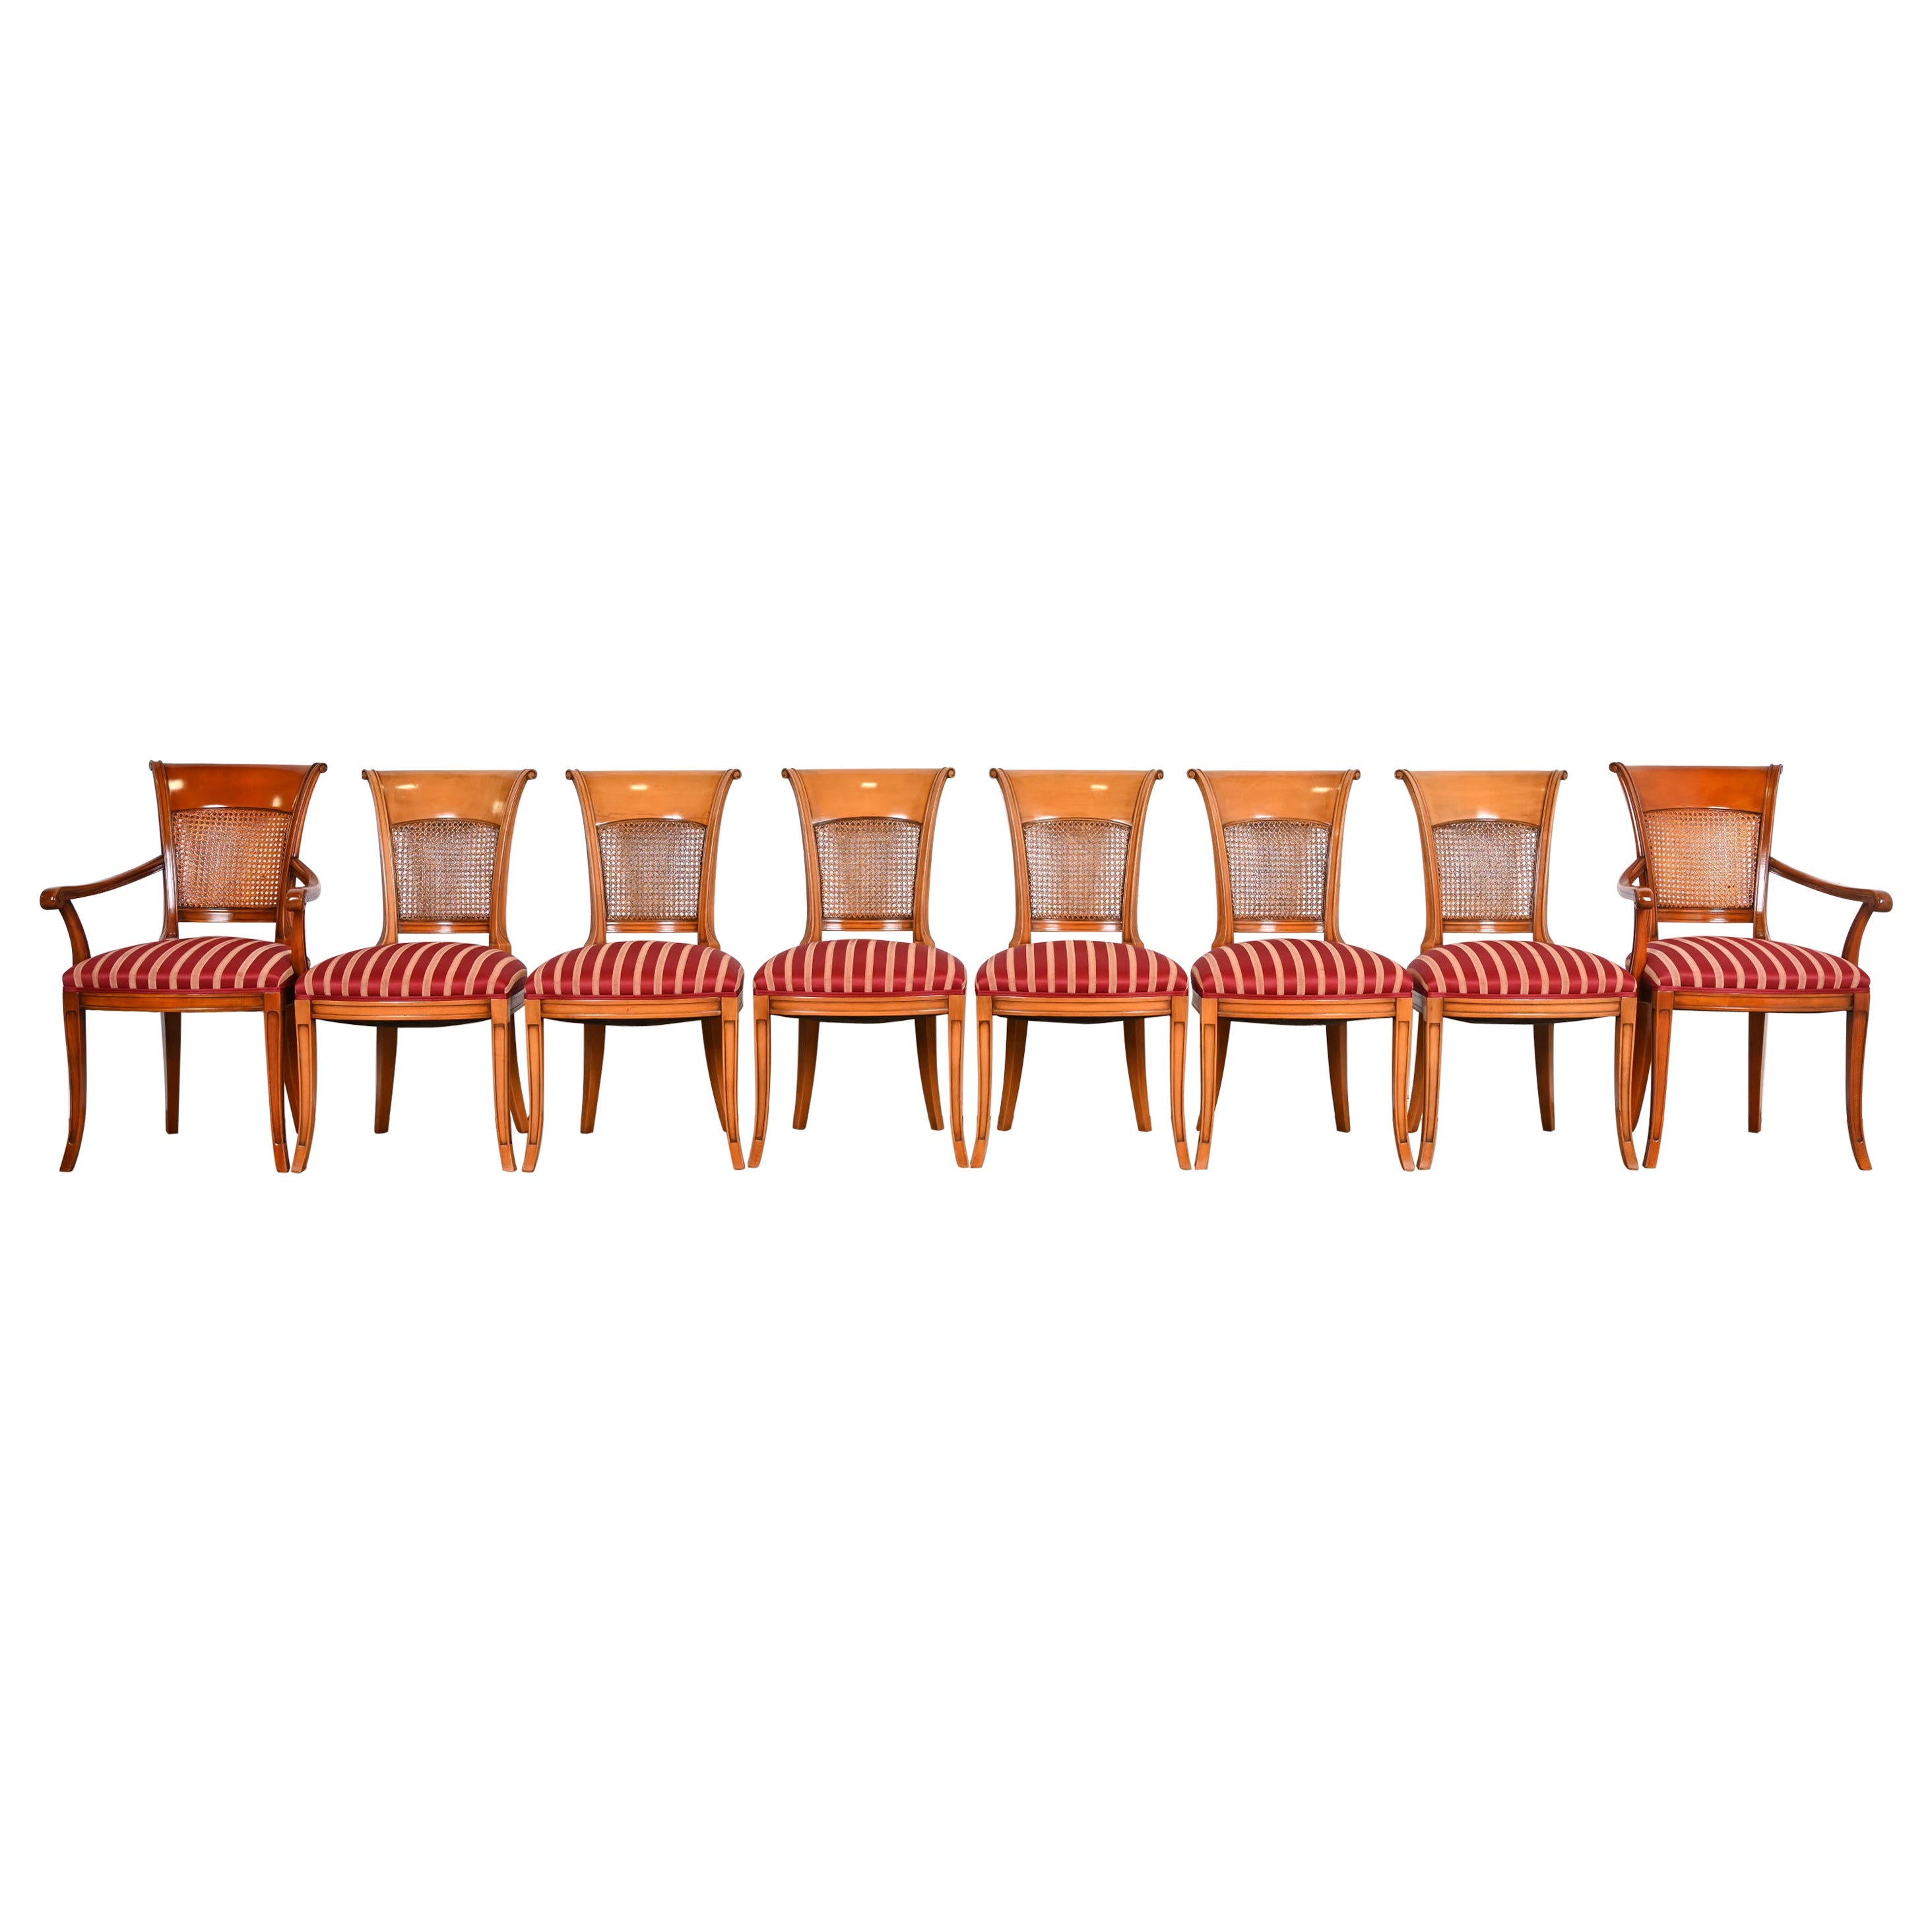 Italian Neoclassical Fruitwood Dining Chairs, Set of Eight